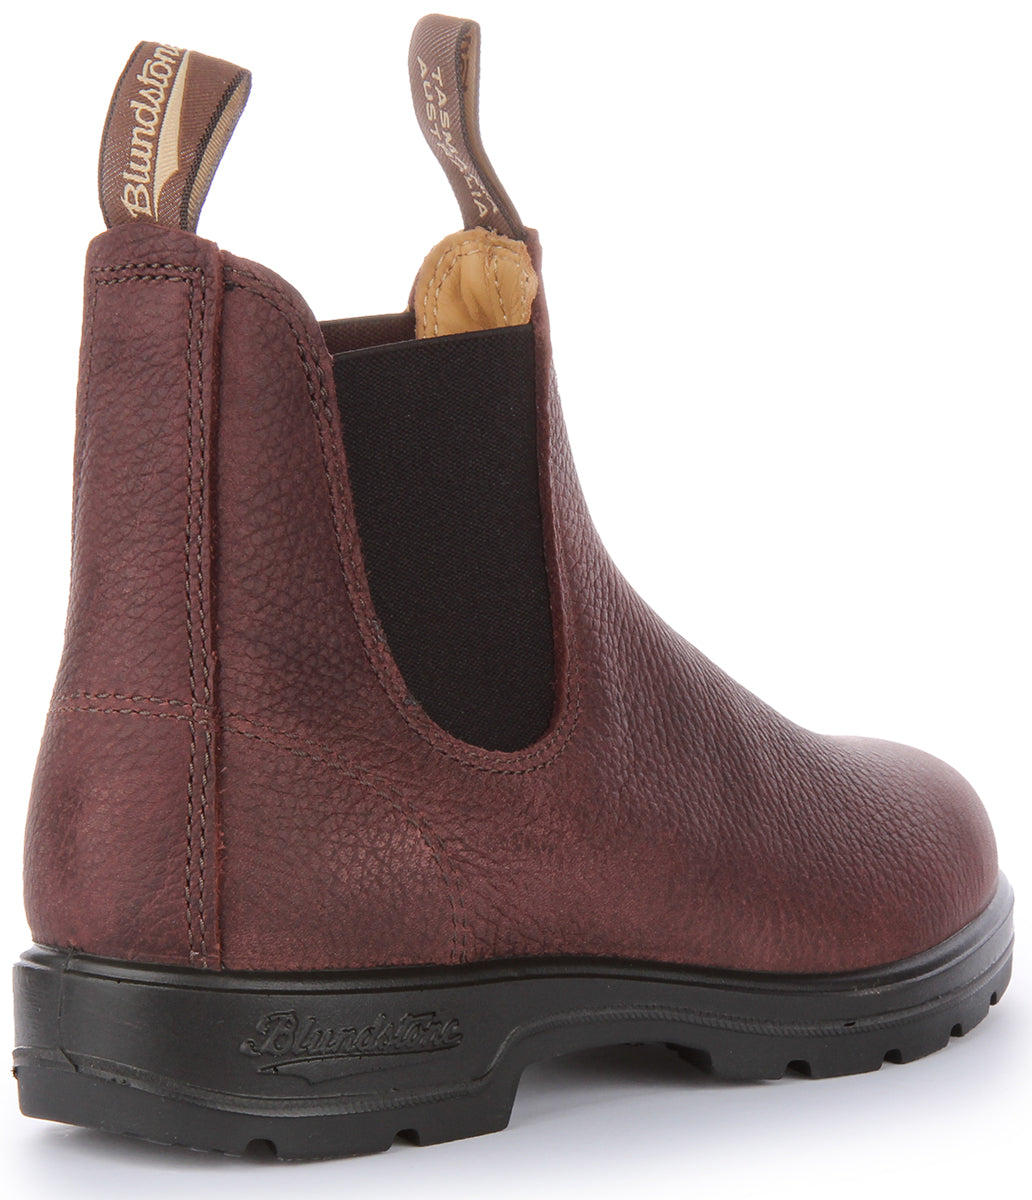 Blundstone 2247 In Brown